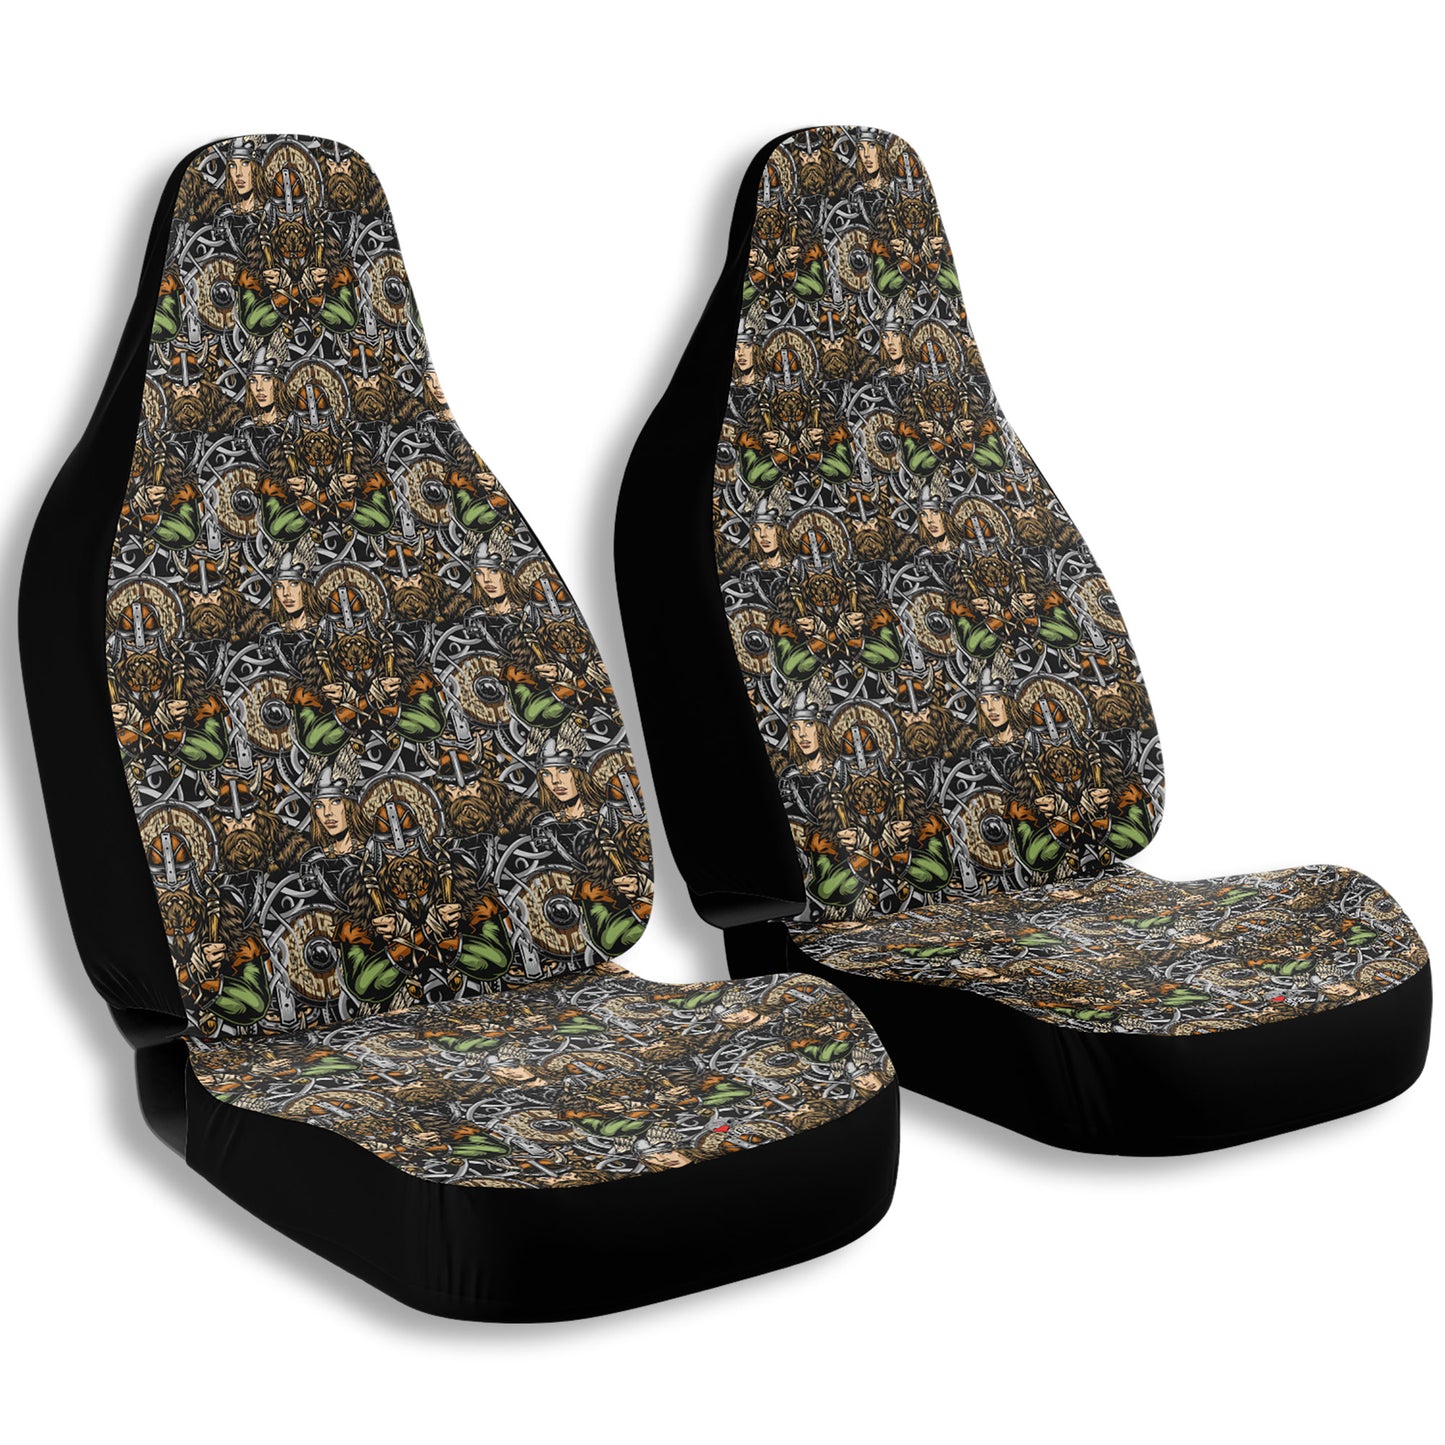 Vintage Nordic Warriors car seat covers